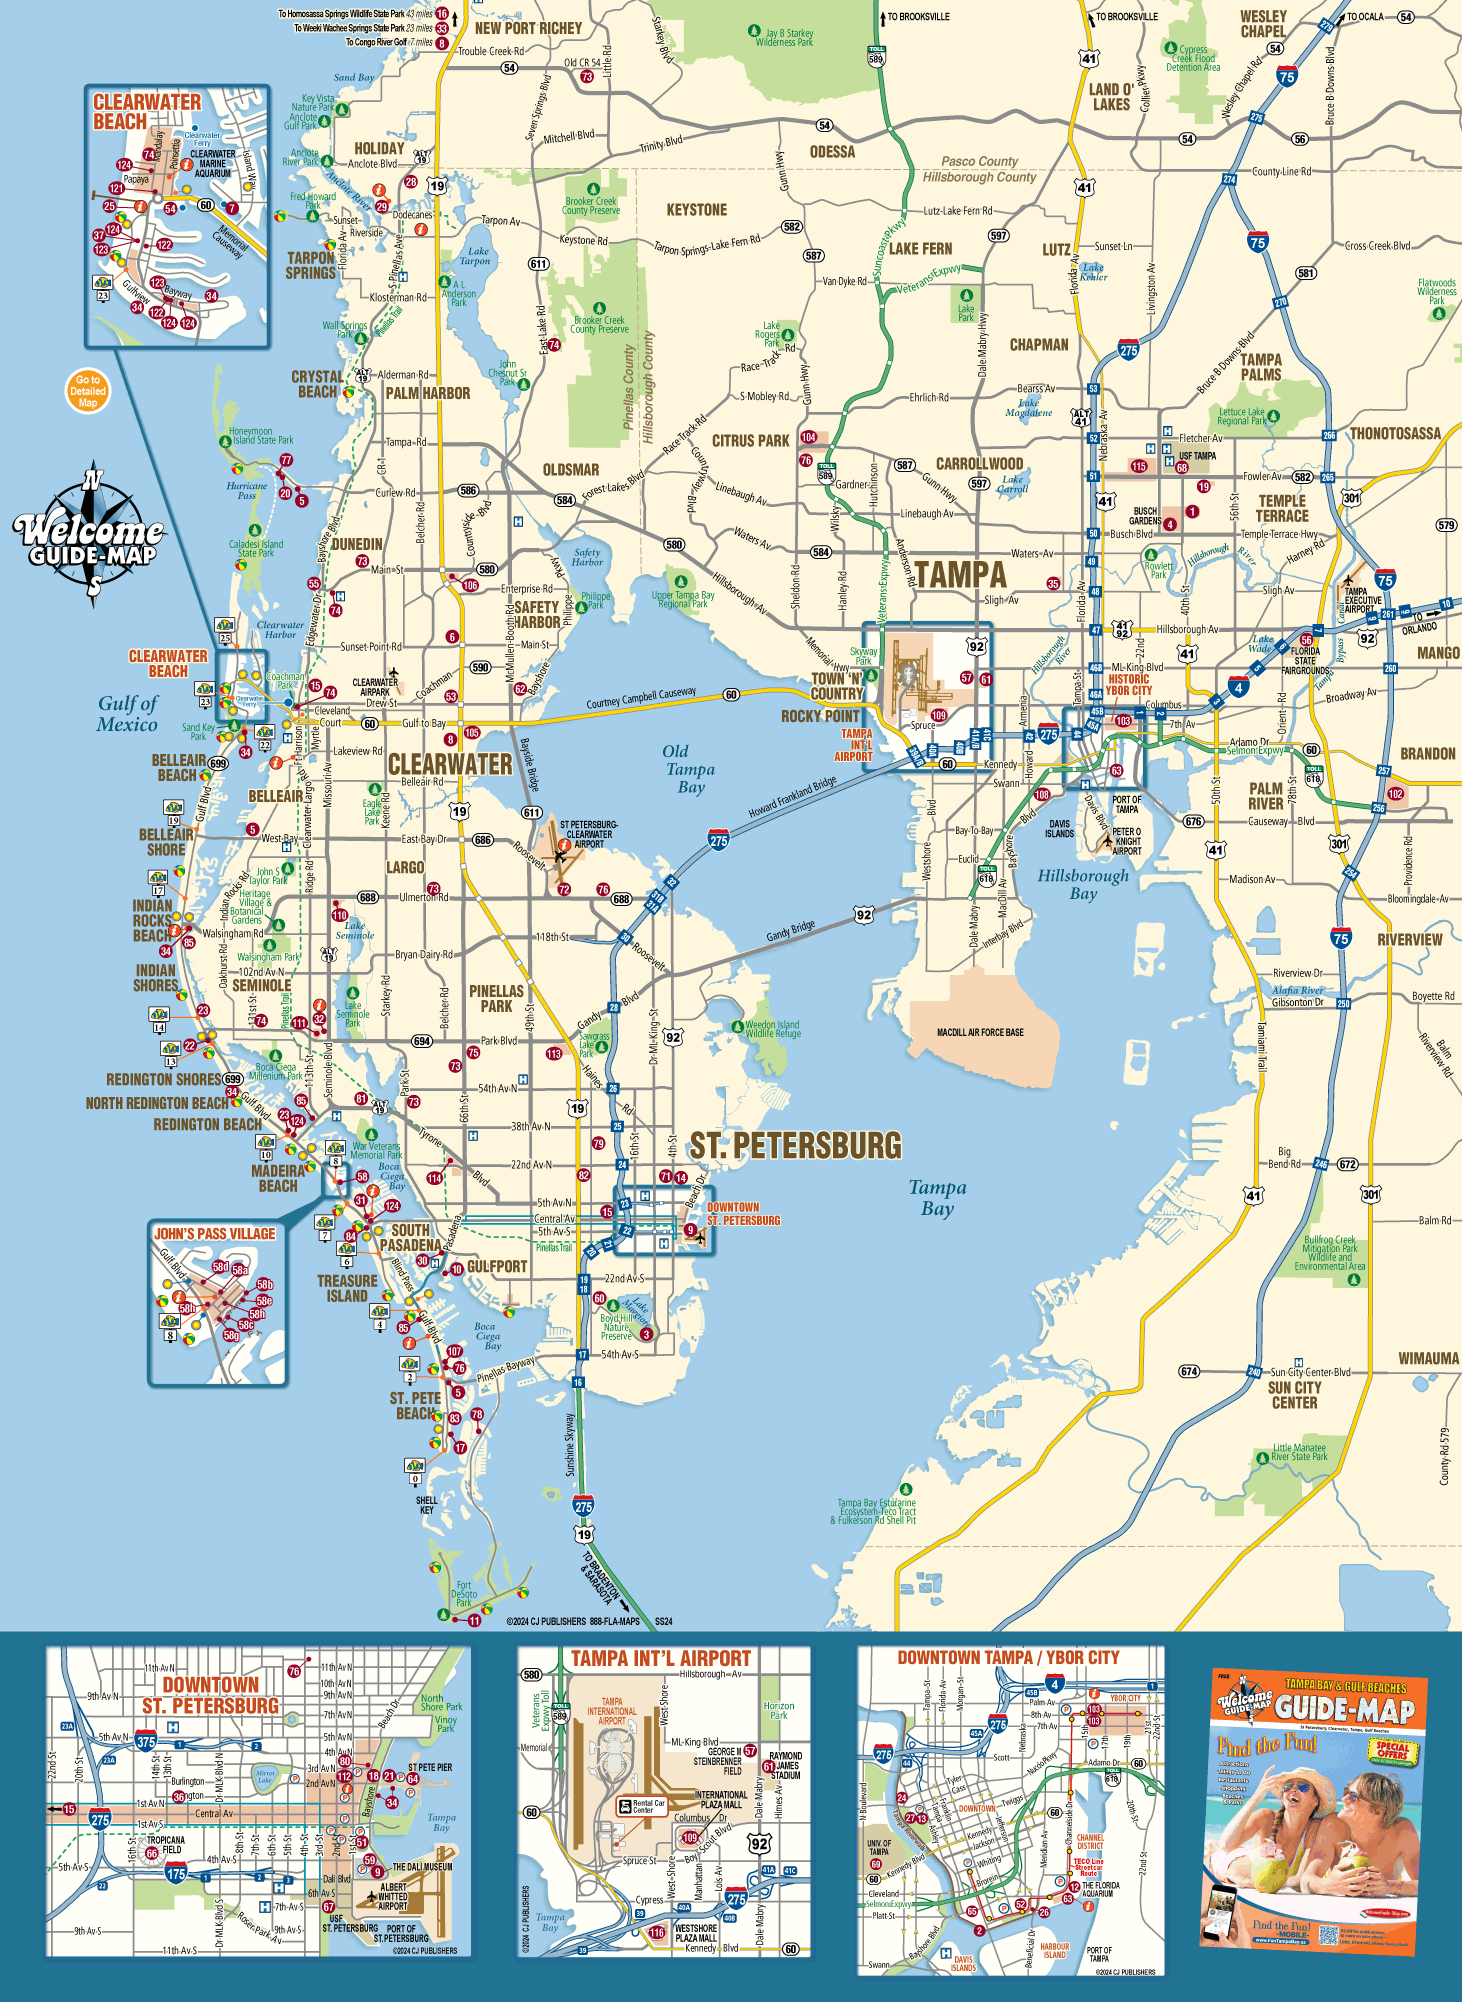 Map Of Tampa Bay Florida Welcome Guide Map To Tampa Bay Florida Tampa Bay Florida Map Now Online